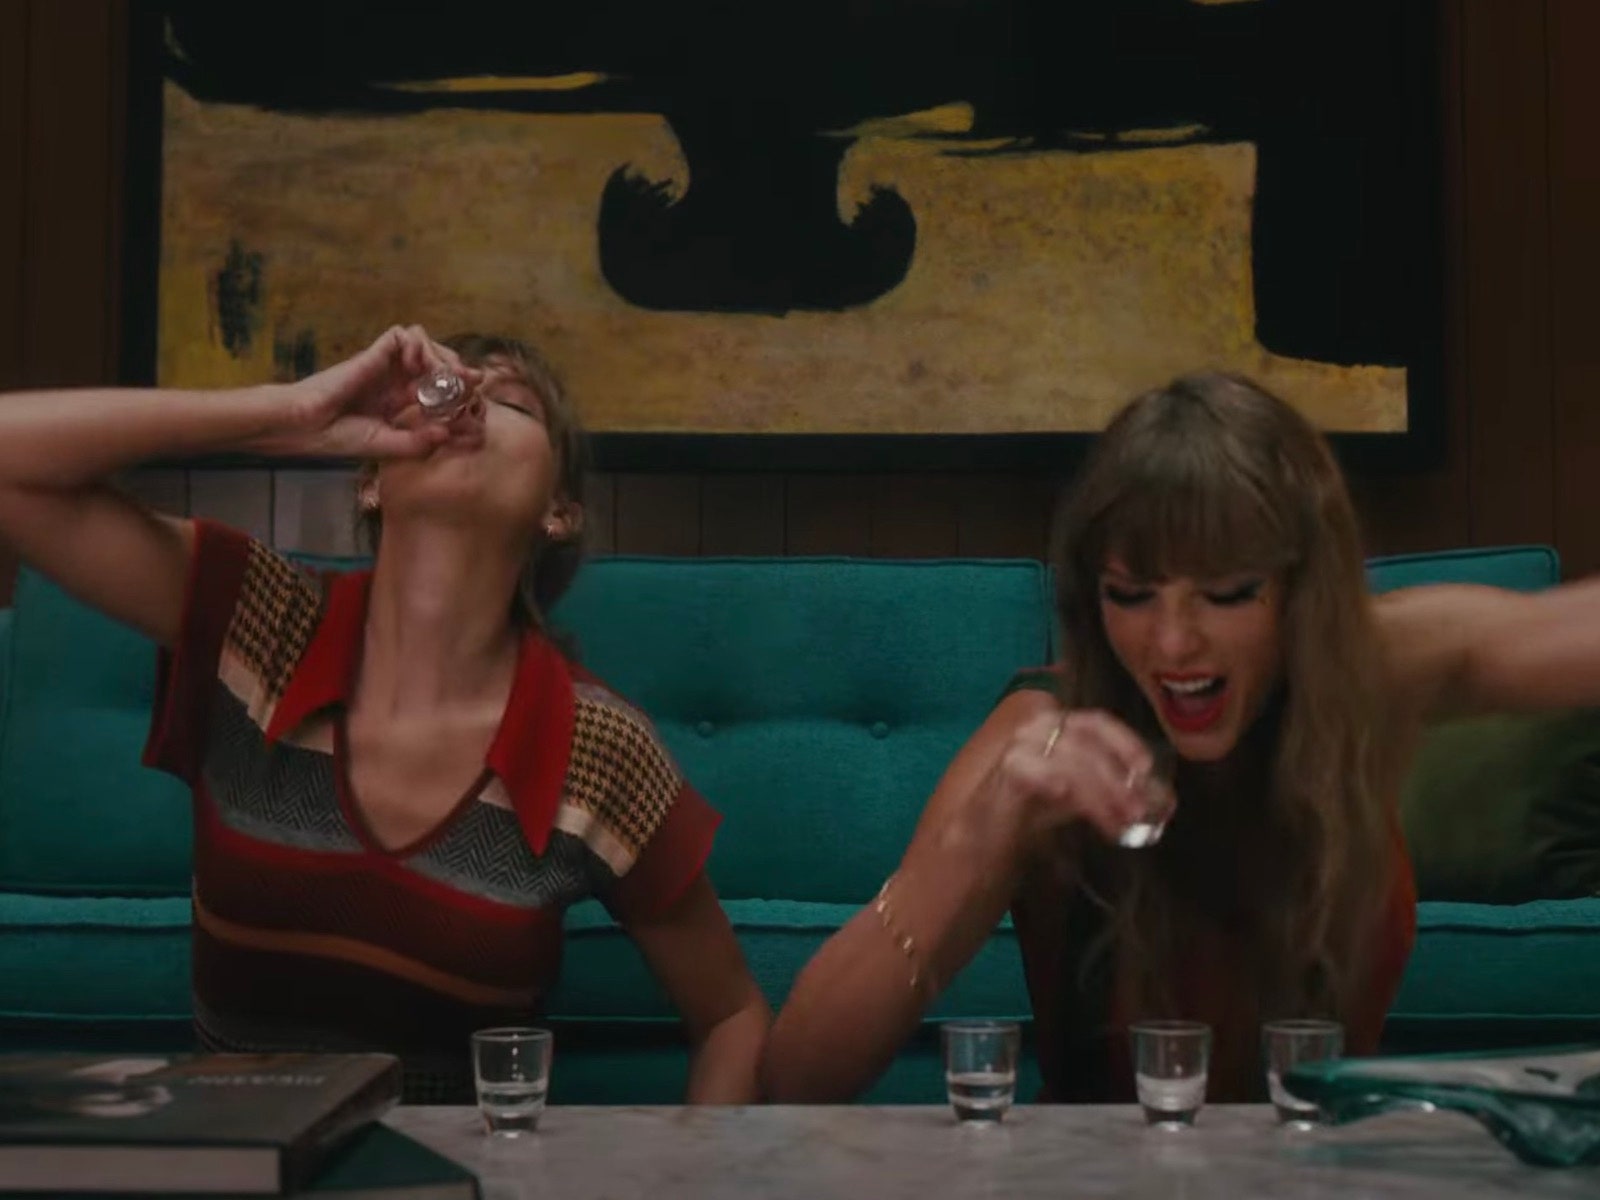 Taylor Swift Parties With Her “Anti Hero” (Also Taylor Swift) In New Video: Watch